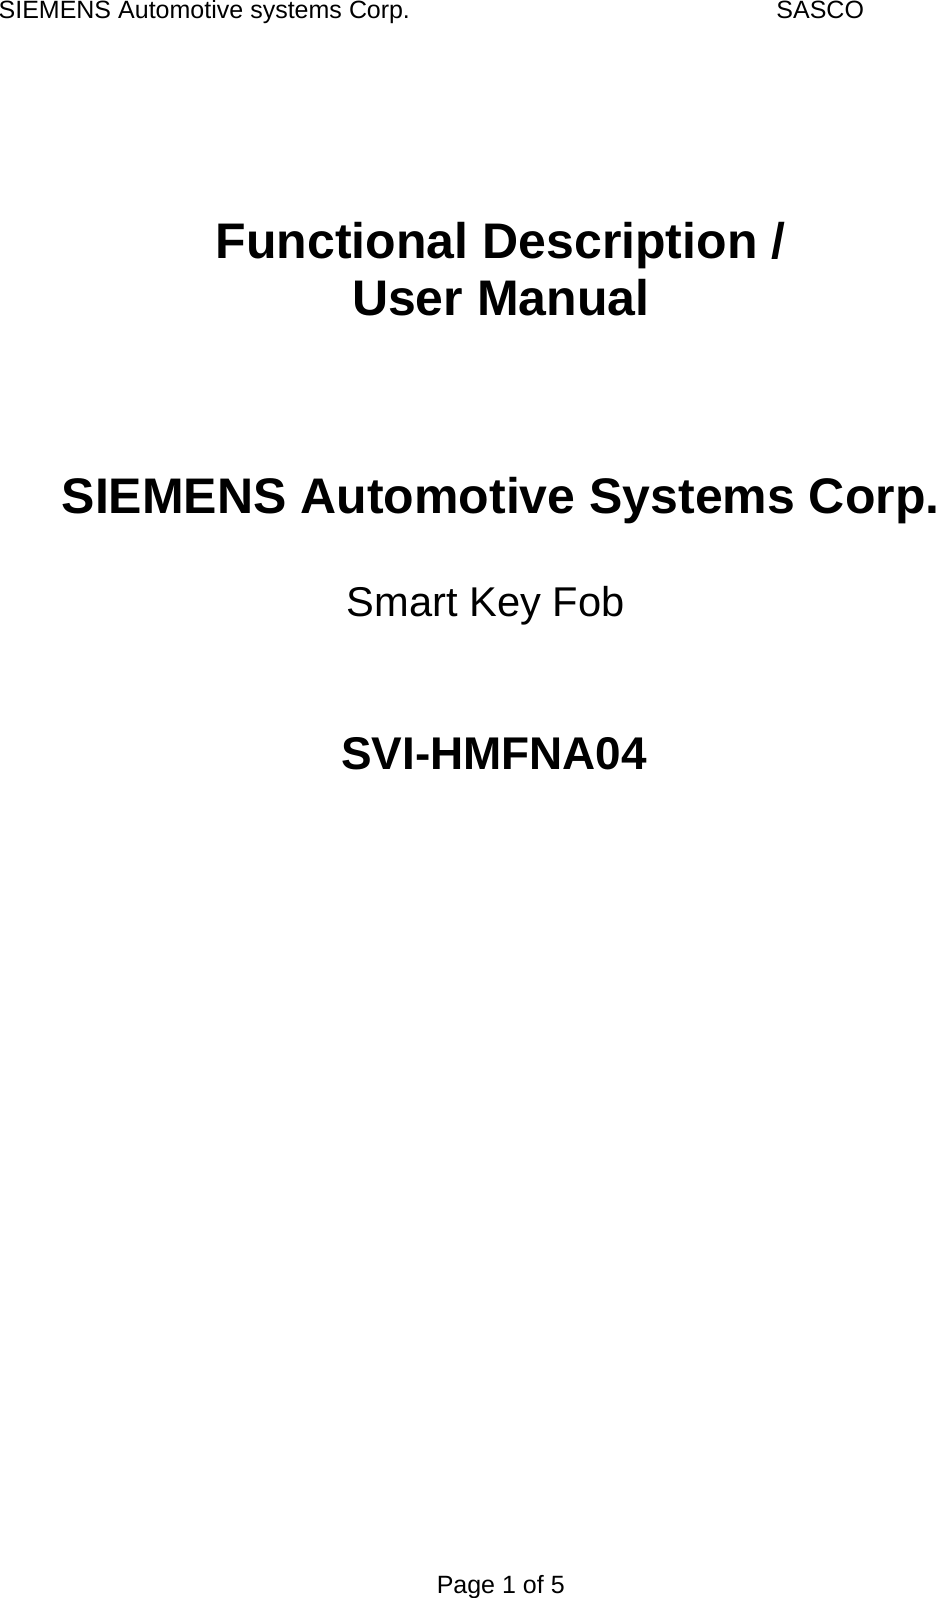 SIEMENS Automotive systems Corp.    SASCO Page 1 of 5    Functional Description / User Manual    SIEMENS Automotive Systems Corp.                    Smart Key Fob    SVI-HMFNA04